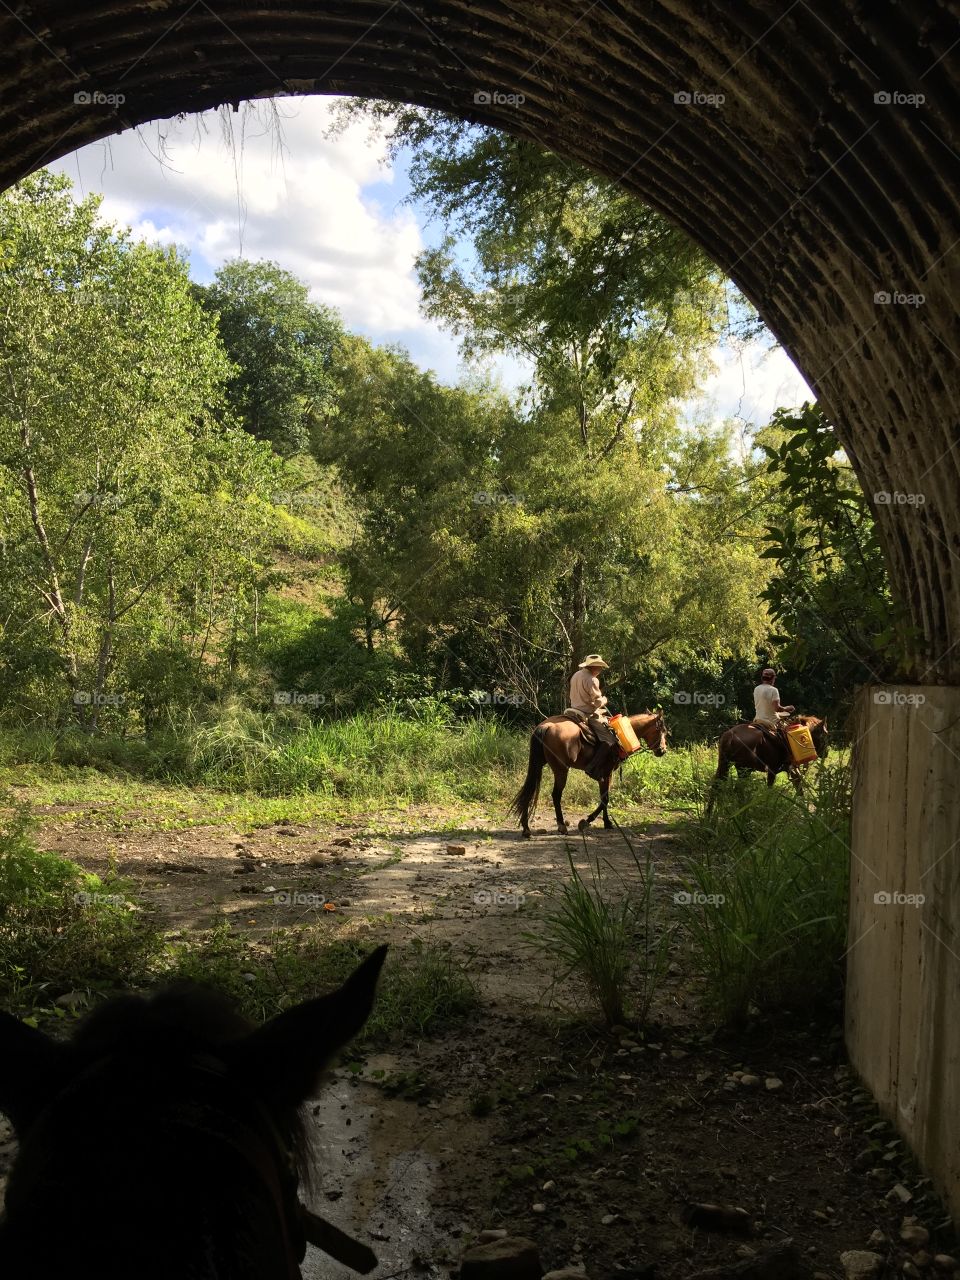 Riding horses down a tunnel on the way back to the ranch. My daily view